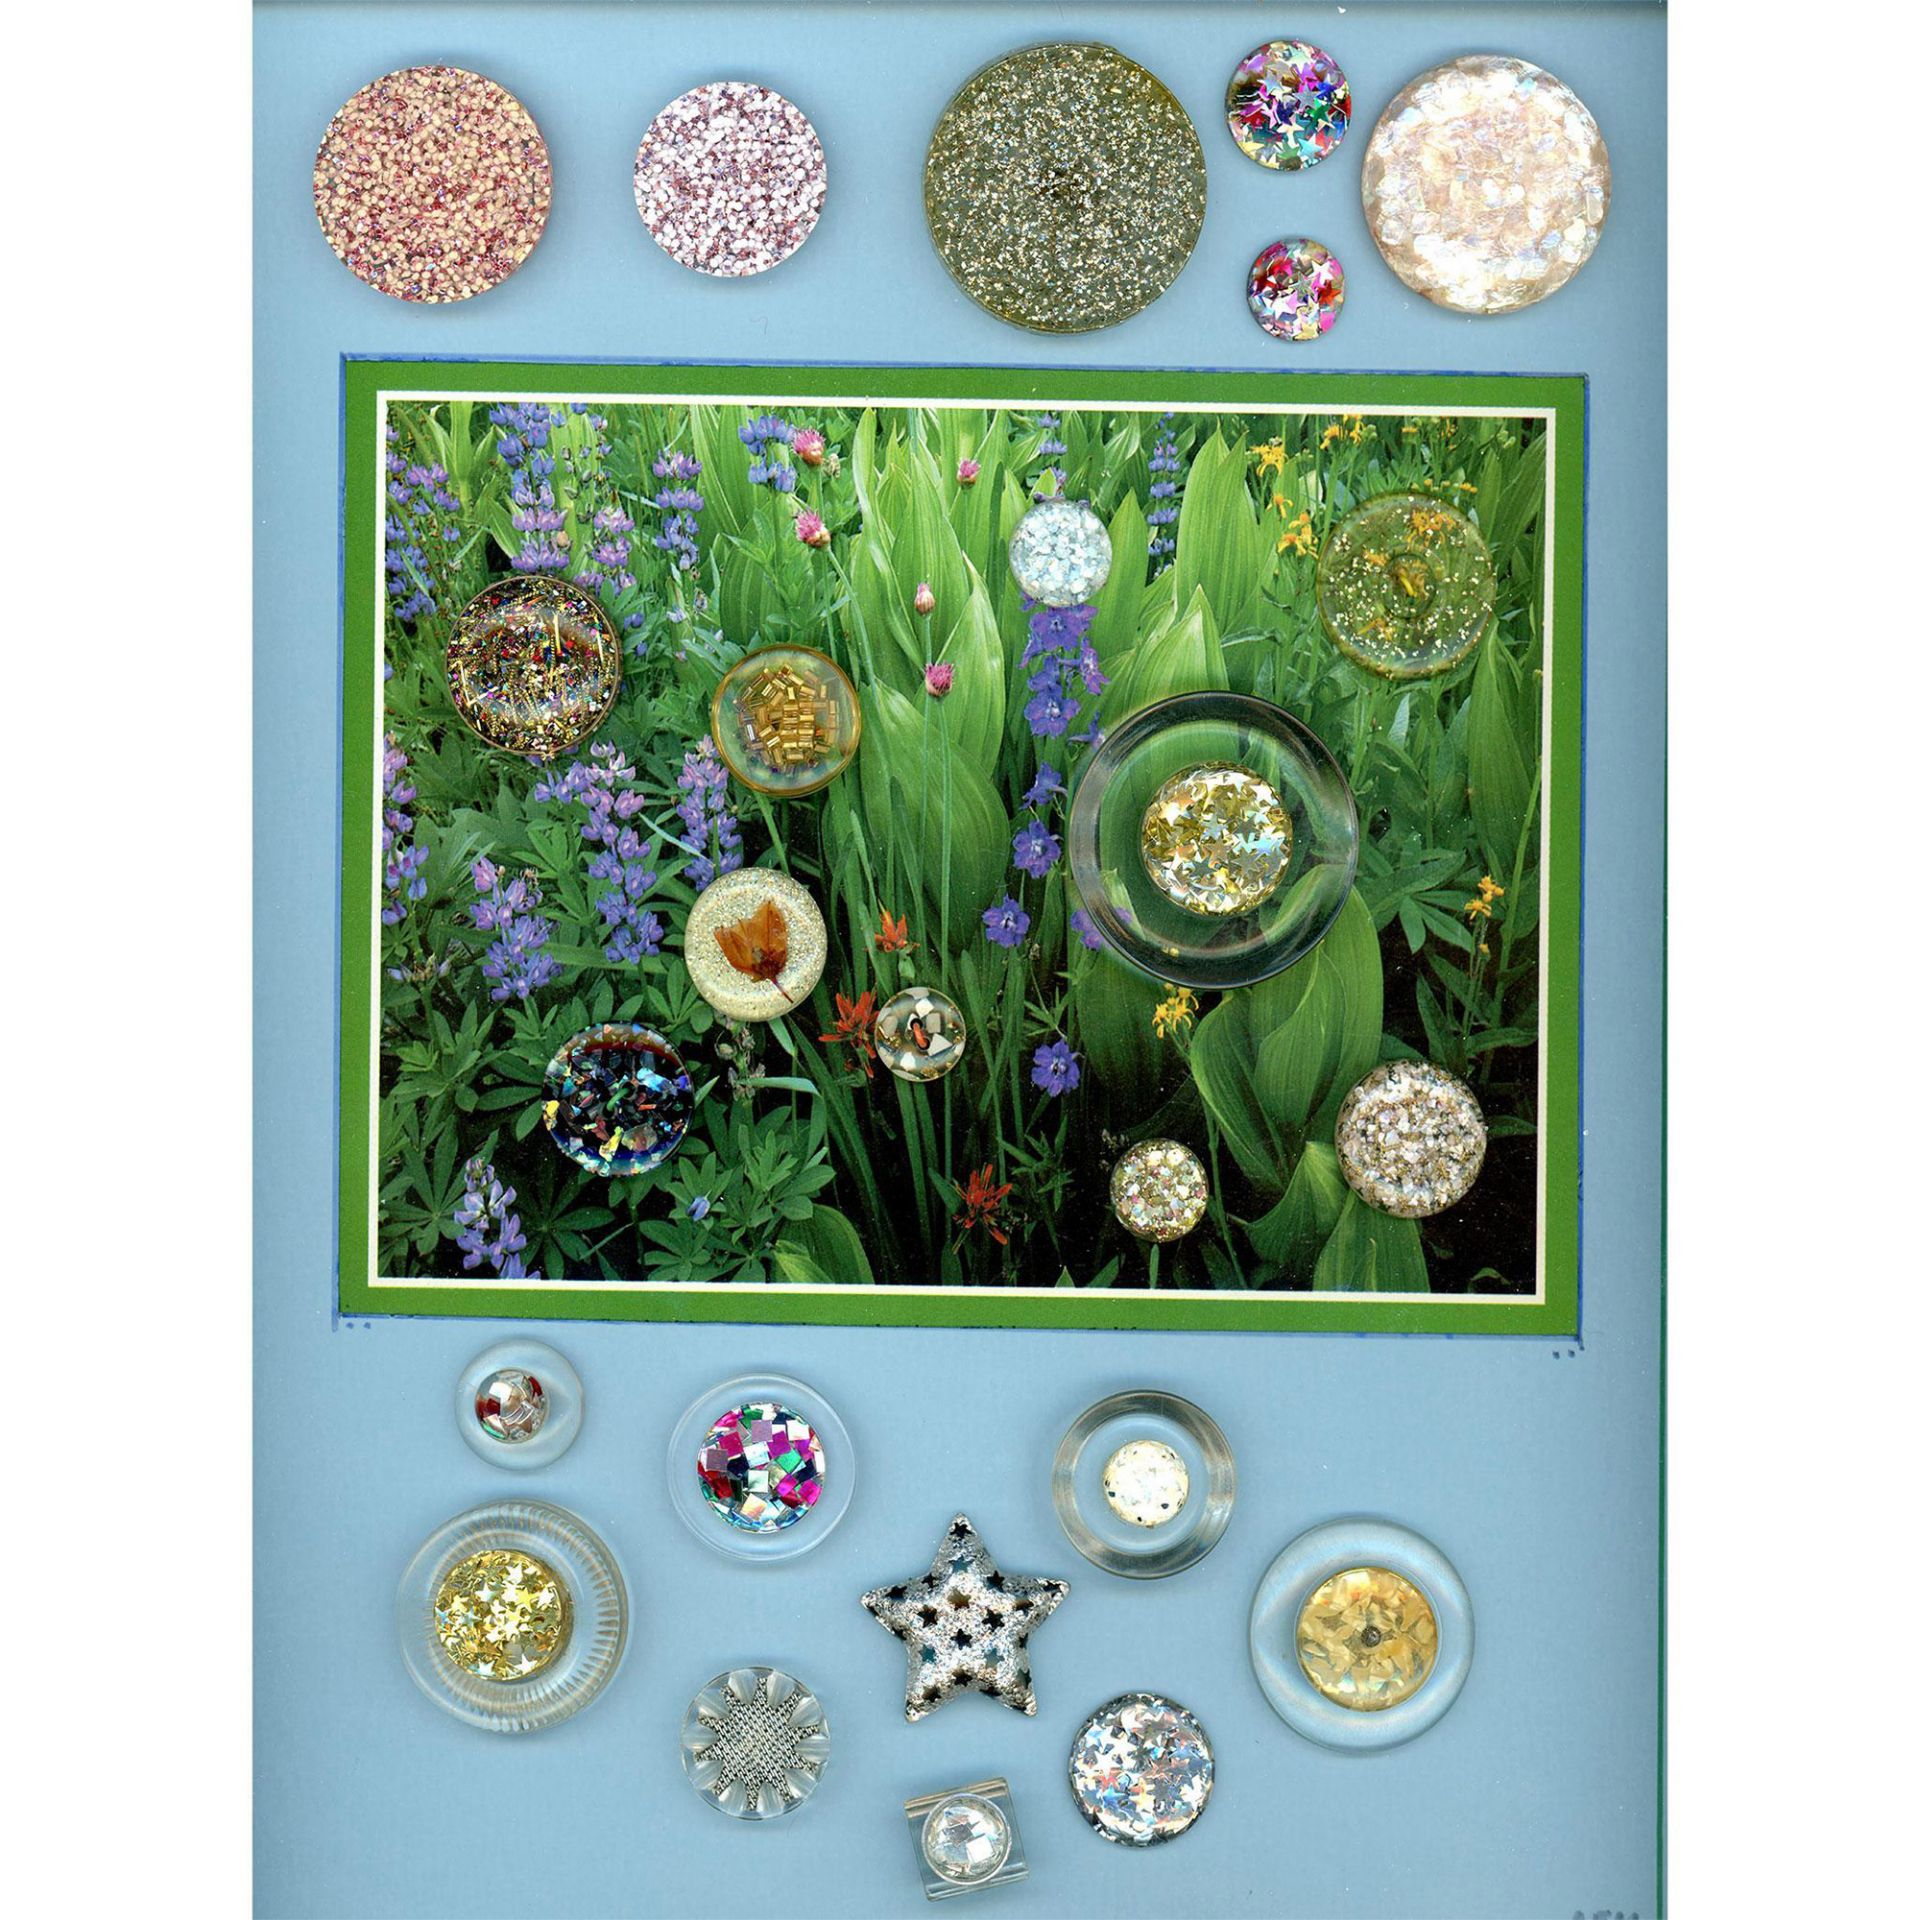 A box lot of assorted material buttons on cards - Image 9 of 11